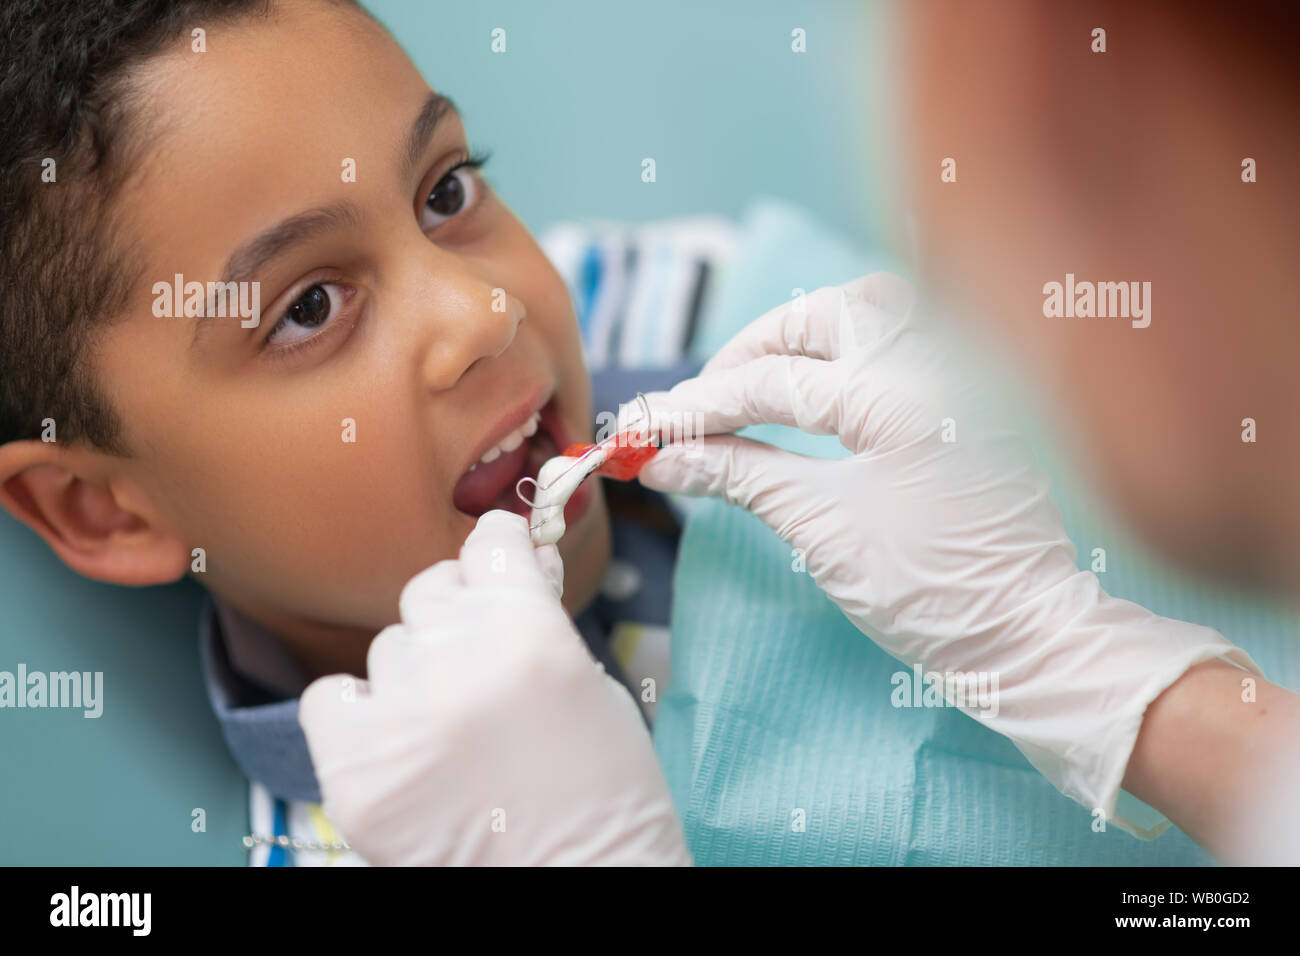 Boy opening mouth while dentist putting mouth guard Stock Photo